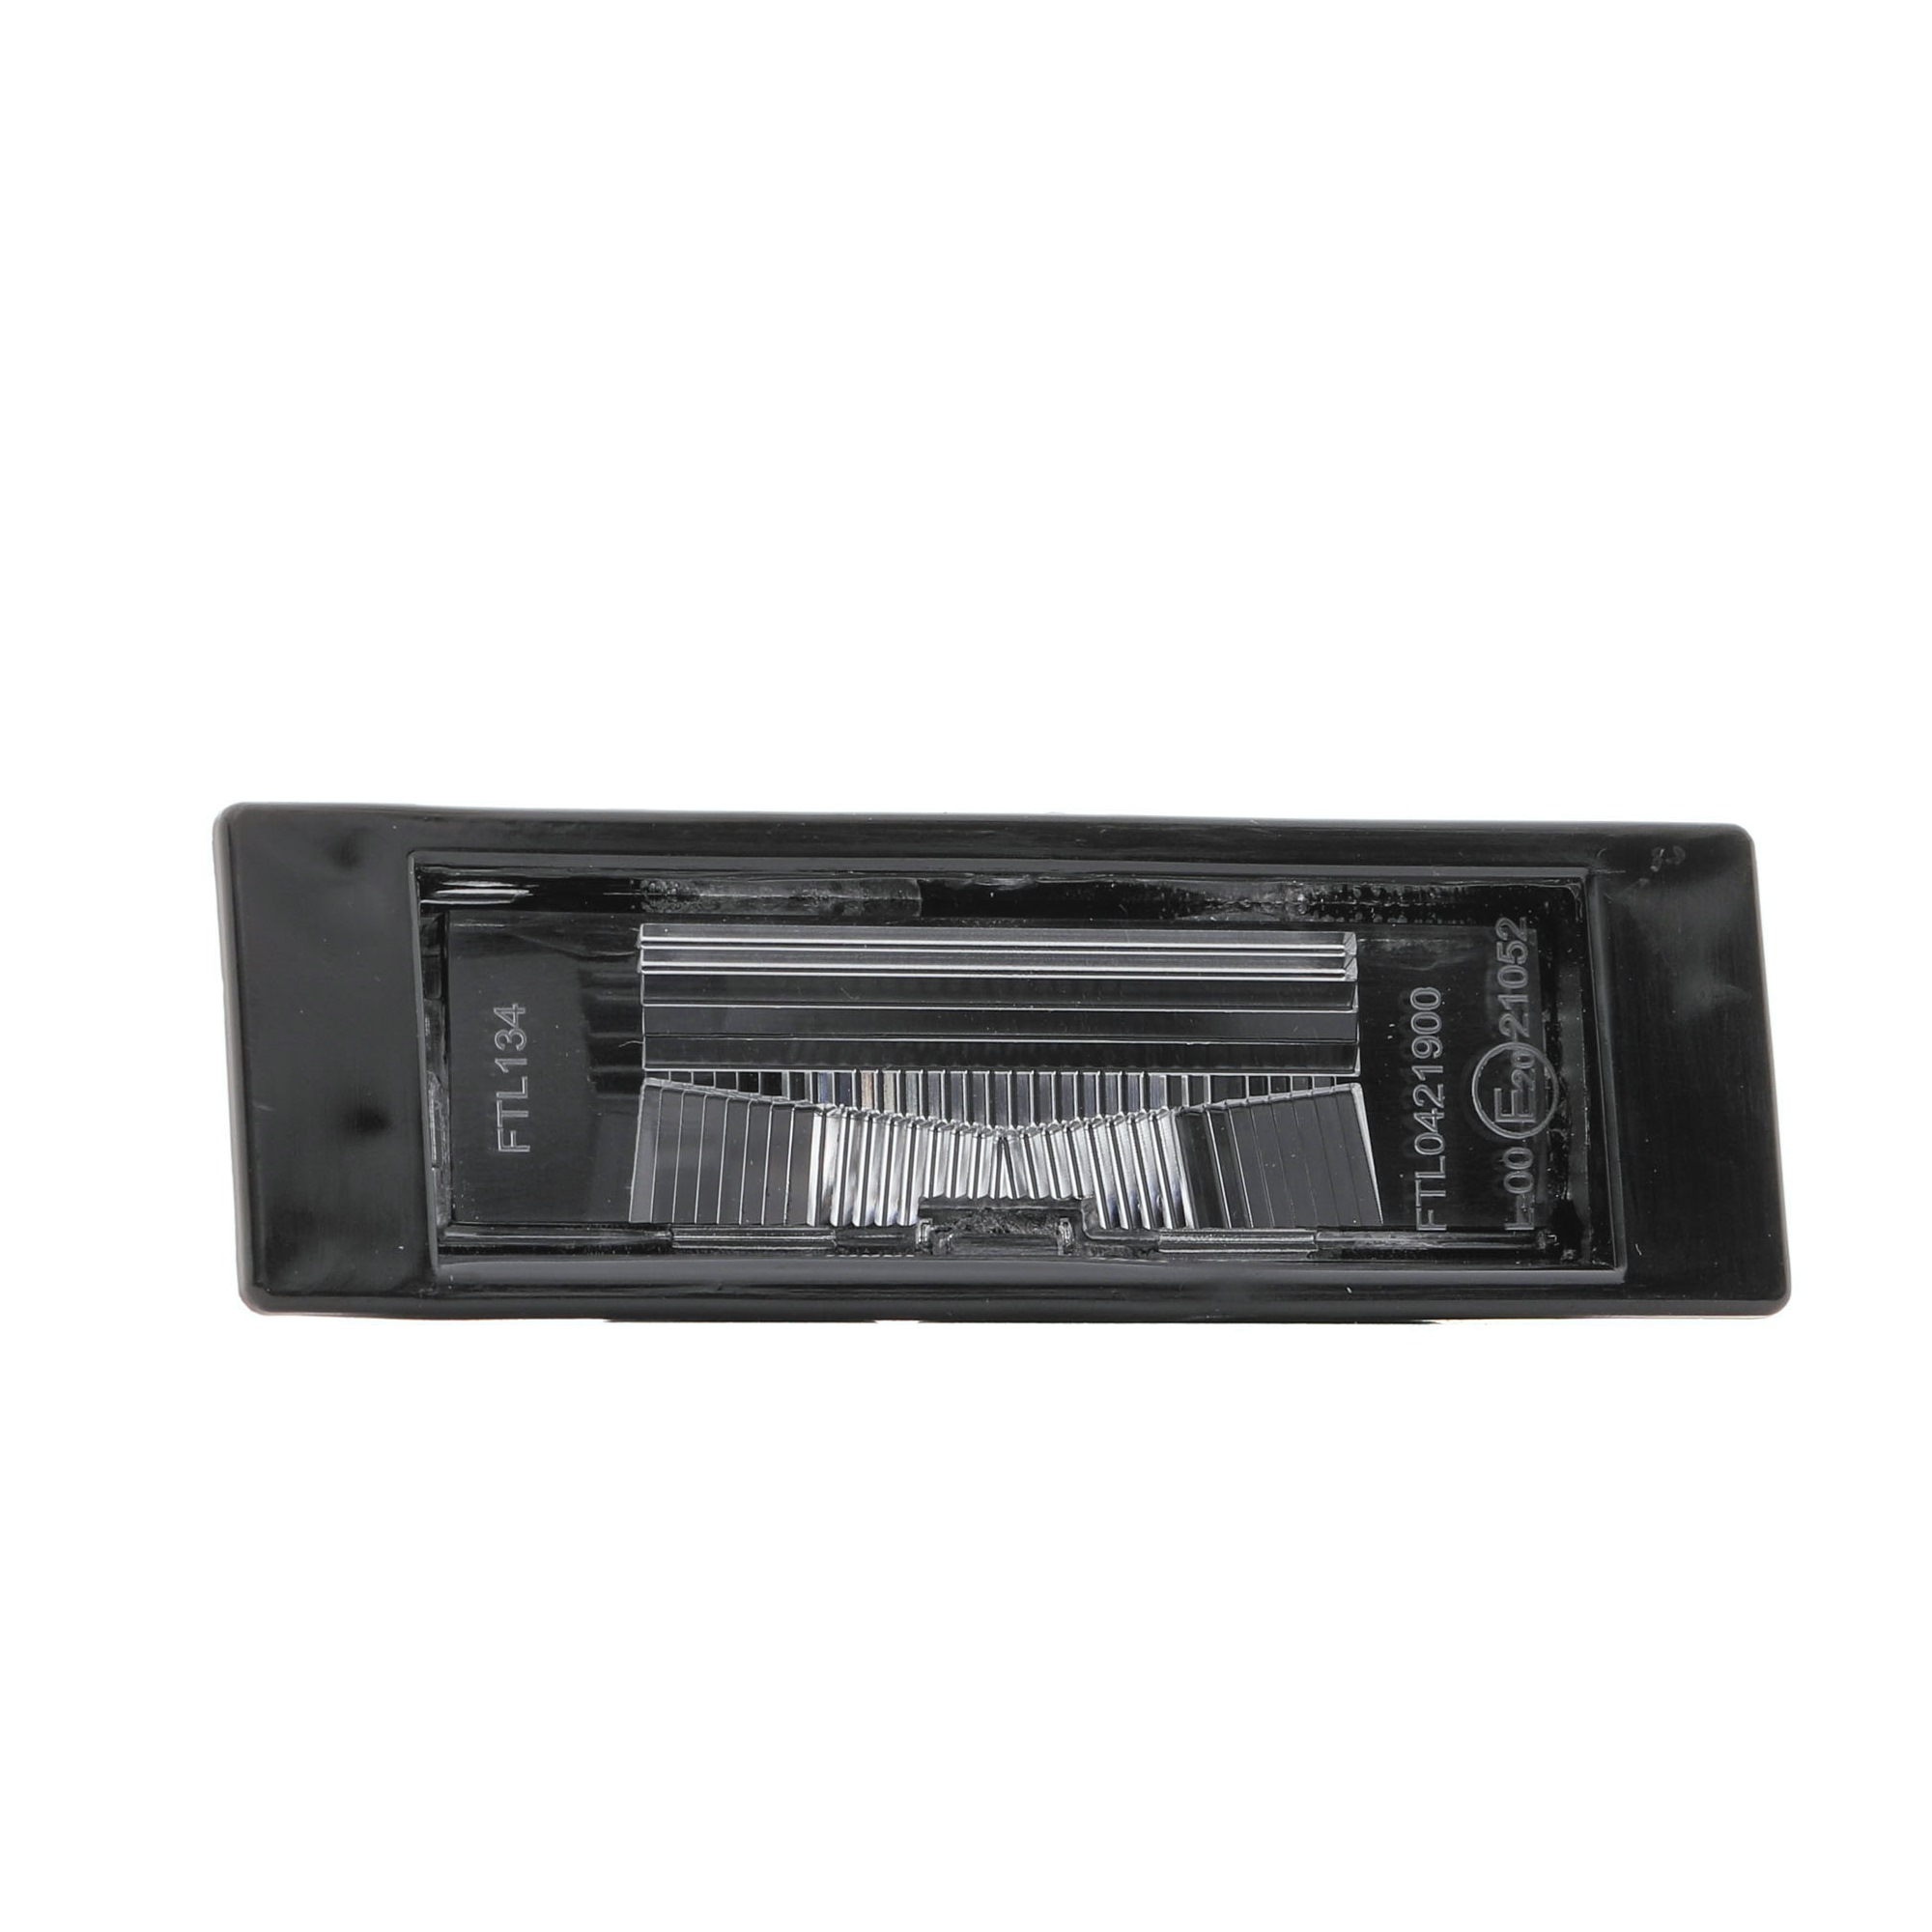 BMW 1 Series Licence Plate Light ABAKUS 004-21-900 cheap